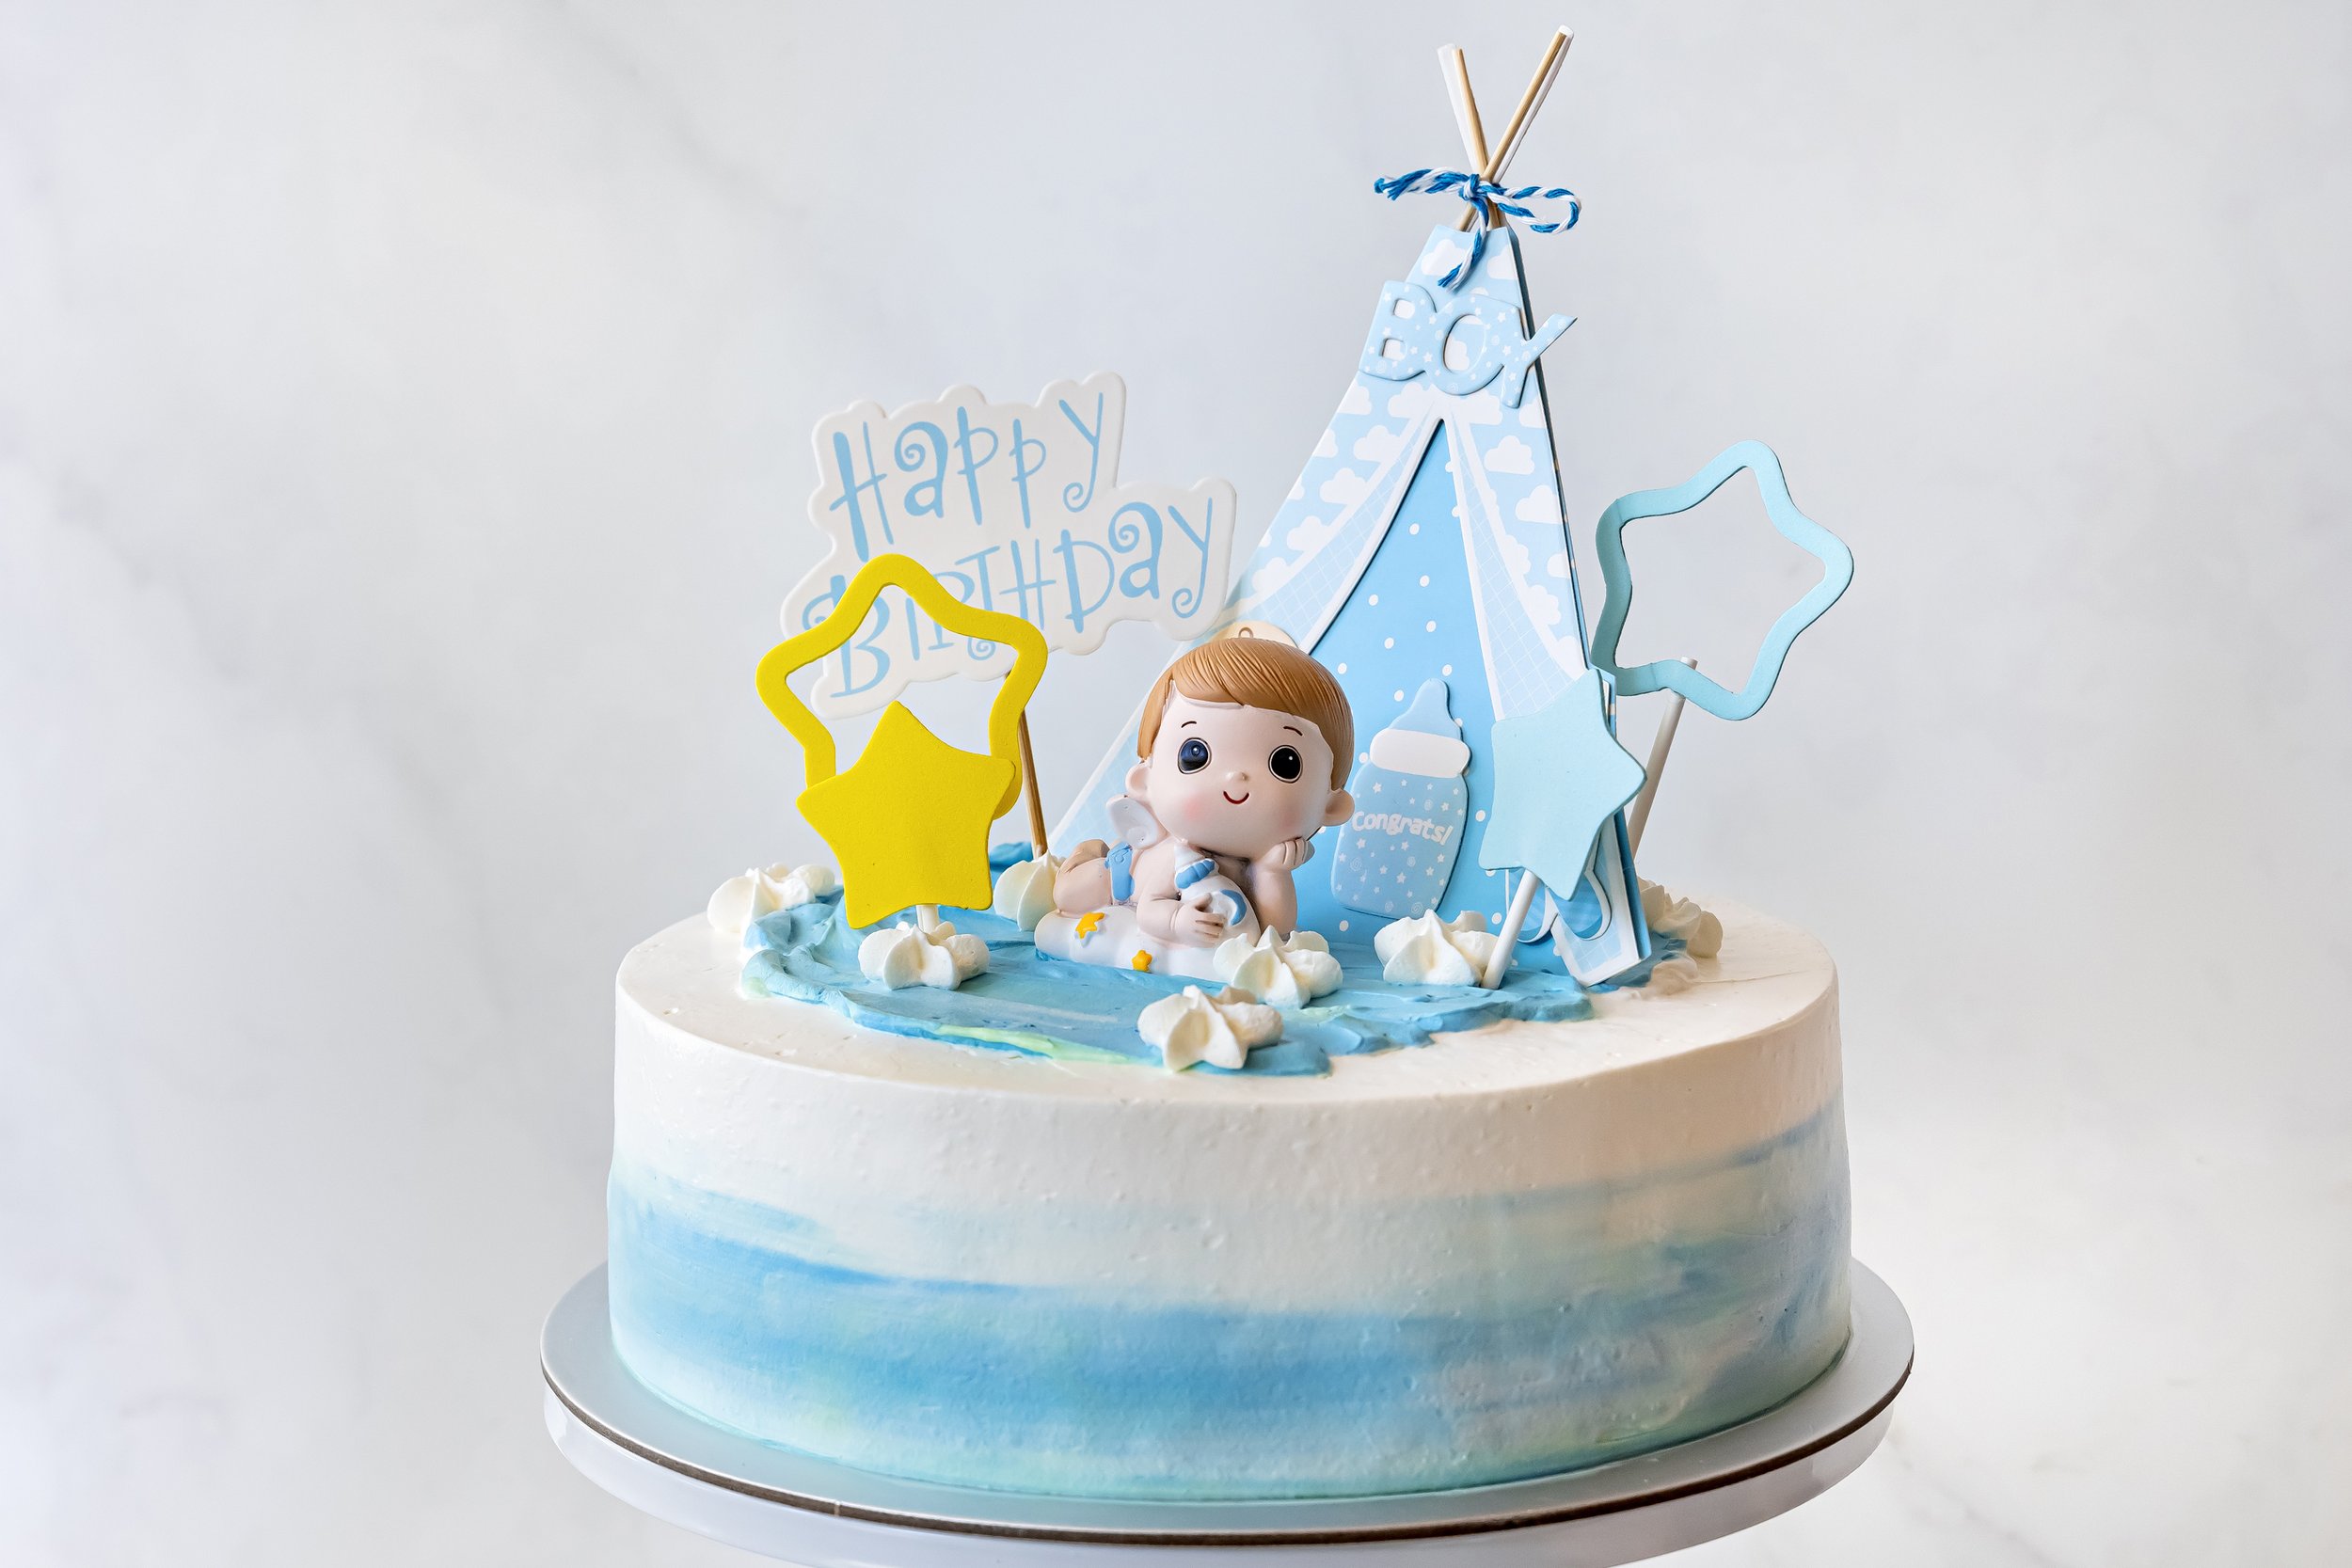 Little Prince 9-inch | $128